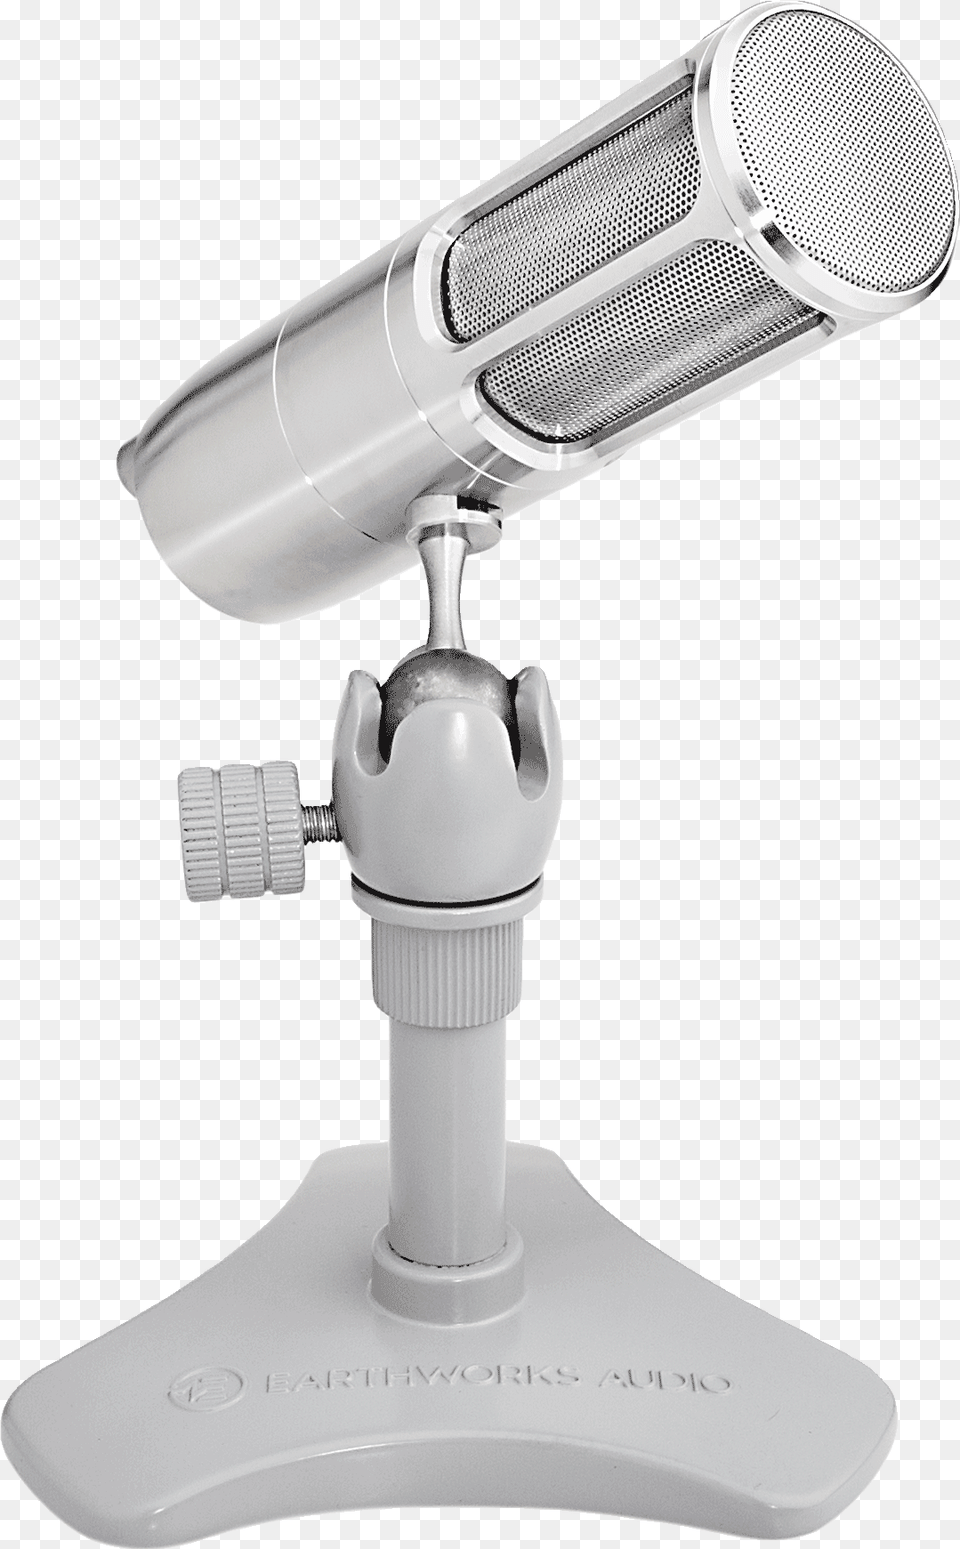 Icon Usb Scalenordic Distributor Of Pro Audio Equipment, Electrical Device, Microphone, Appliance, Blow Dryer Free Png Download